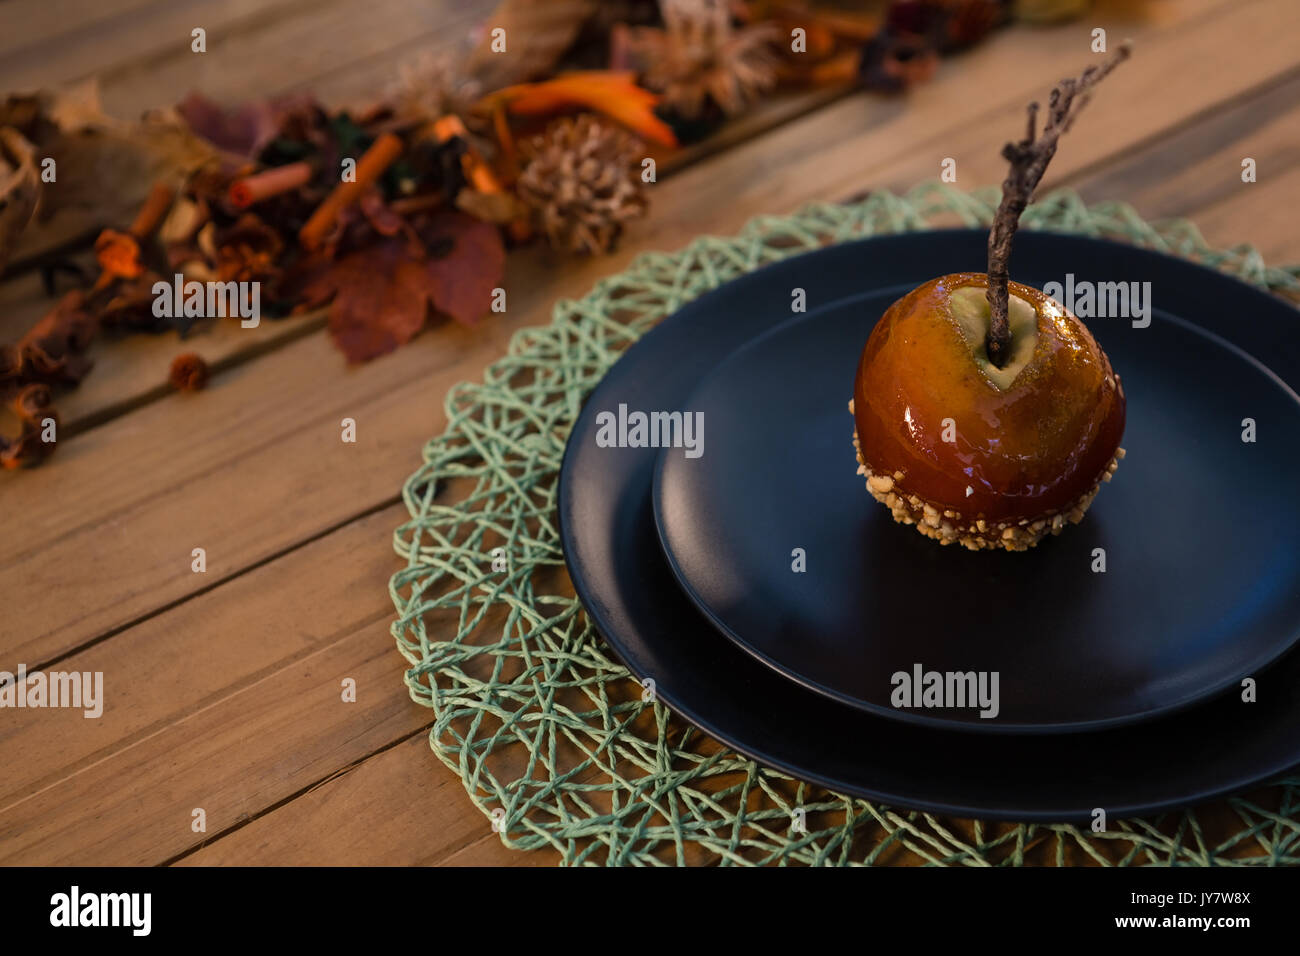 High agnle view of caramelized apple served in plate on wooden table Stock Photo